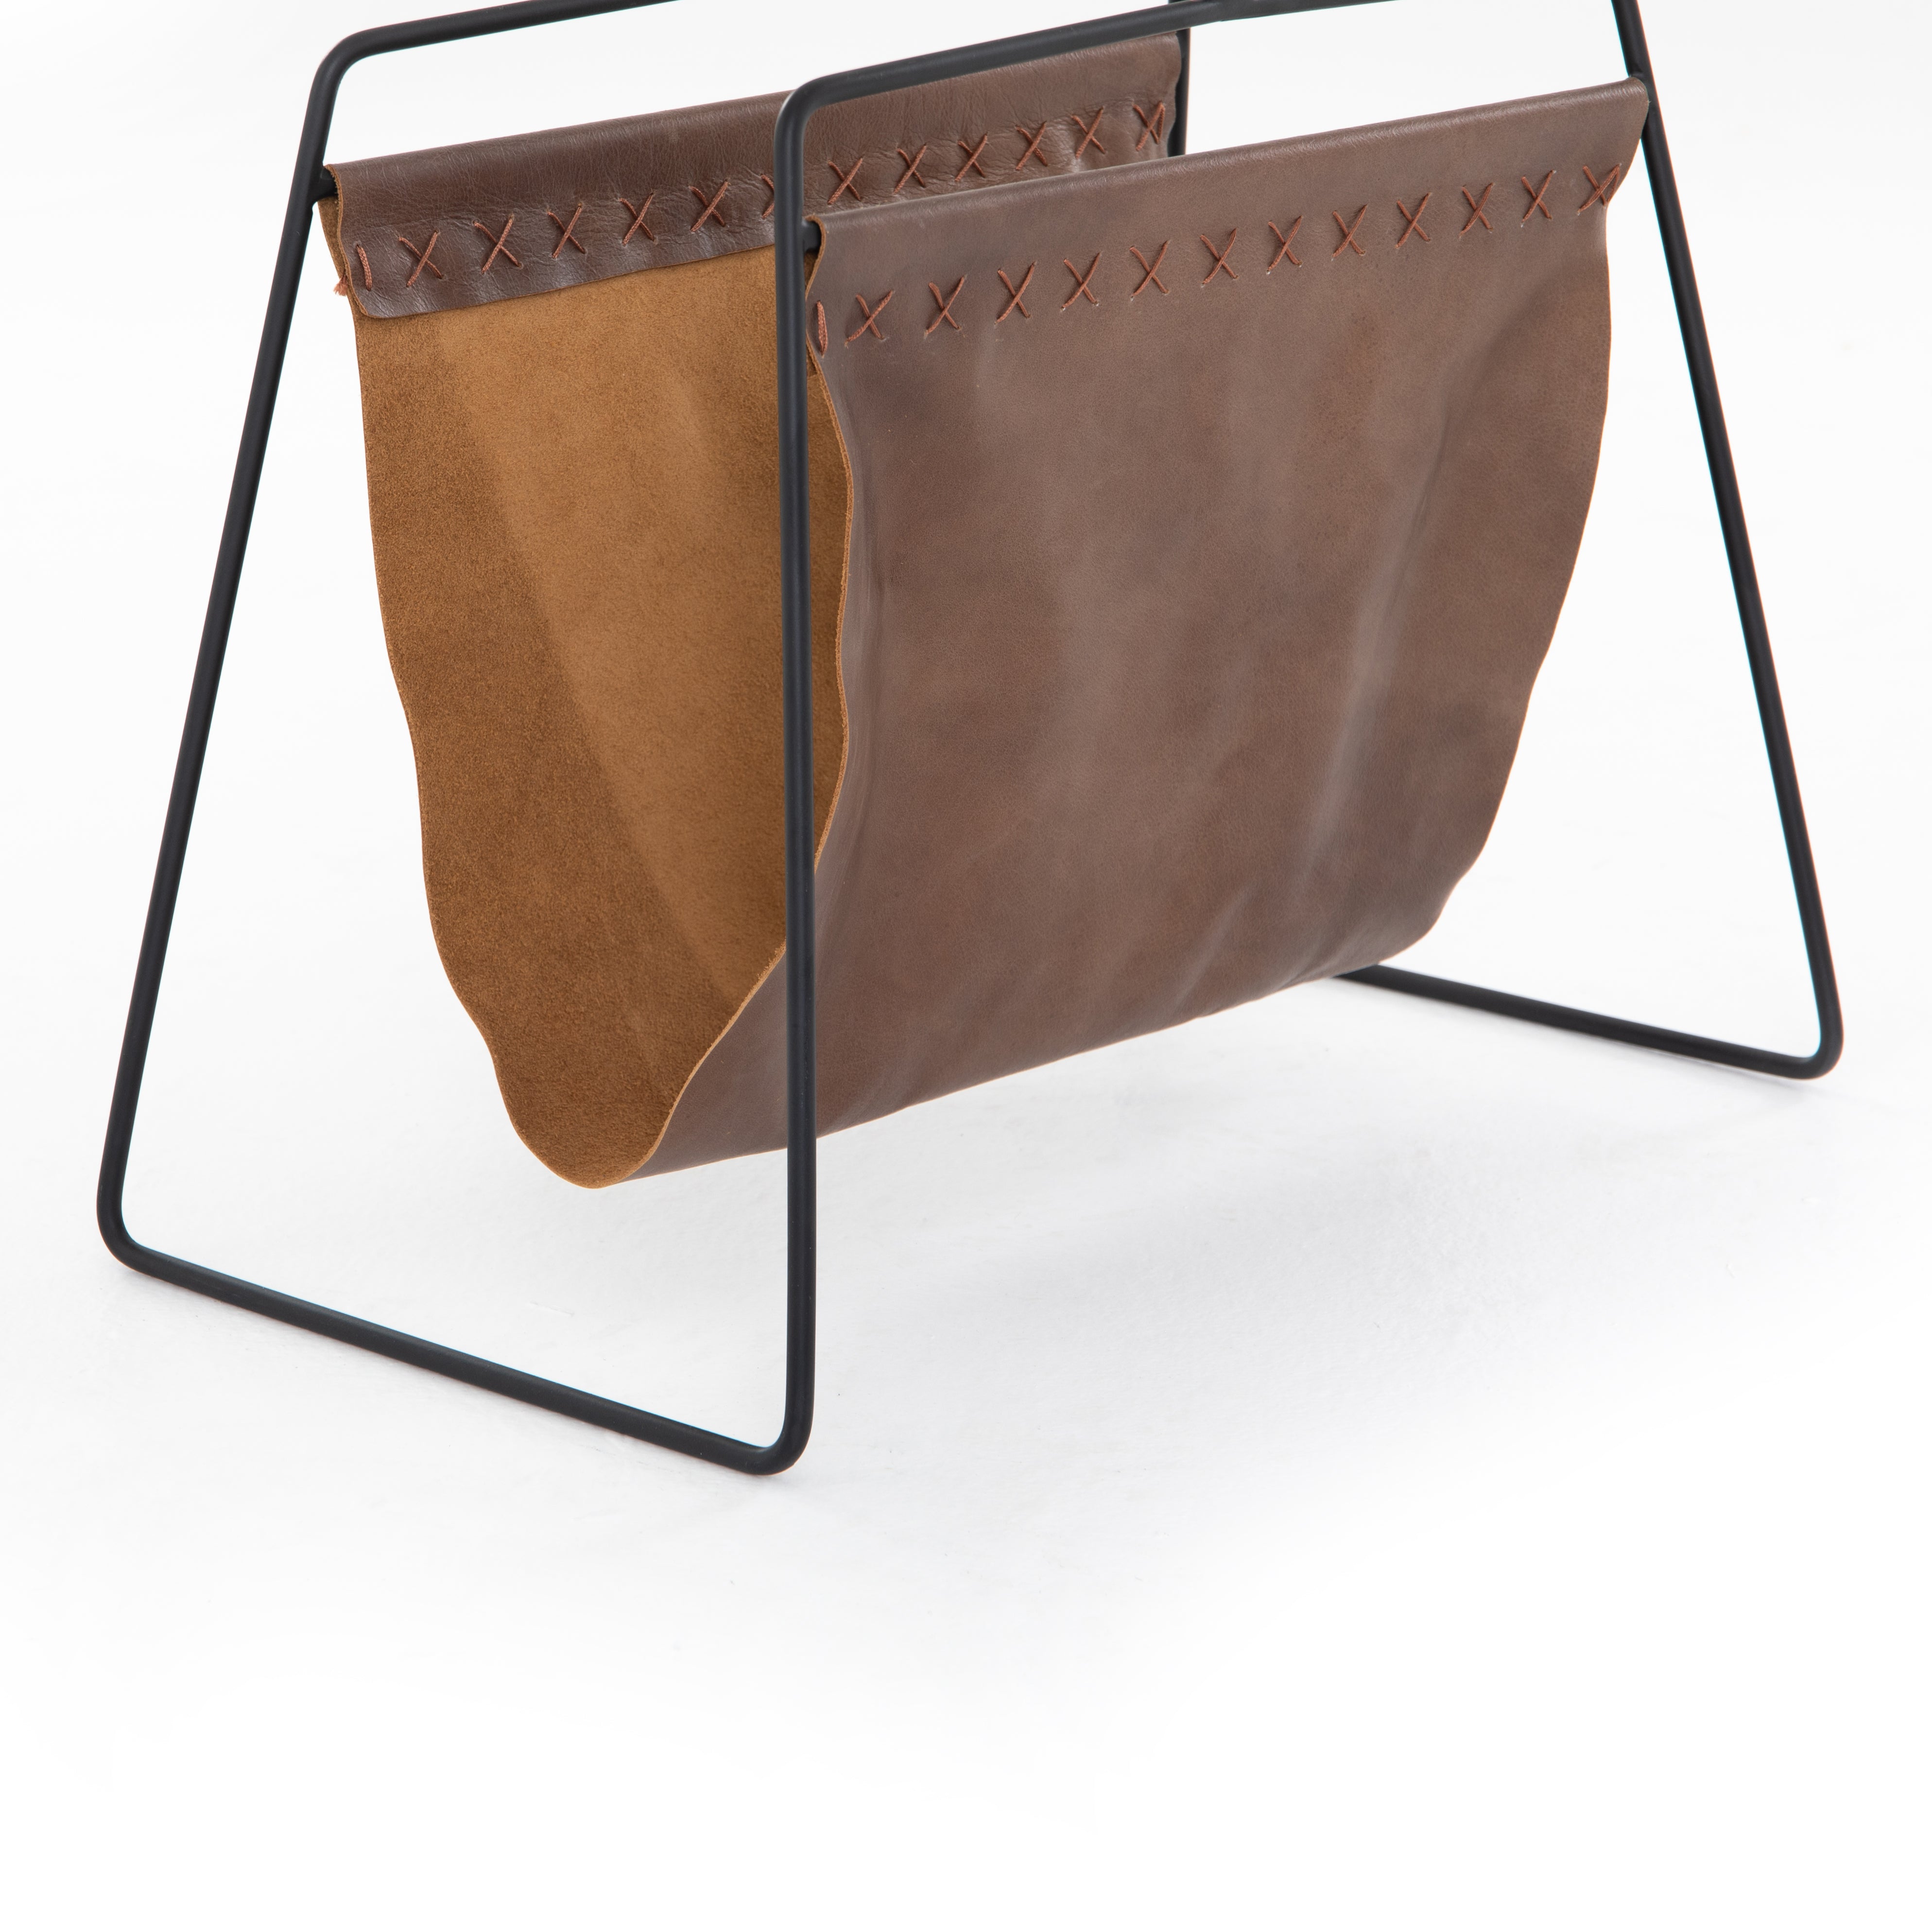 We love the cross-stitching details on this patina brown, top grain leather Aesop Magazing Rack. A gorgeous piece to place all your favorite magazines or important papers in, while also bringing a stylish mid-century vibe to your office or other space.  Overall Dimensions: 18.50"w x 11.75"d x 19.00"h Materials: Top Grain Leather, Iron Colors: Patina Brown, Smooth Jet Black